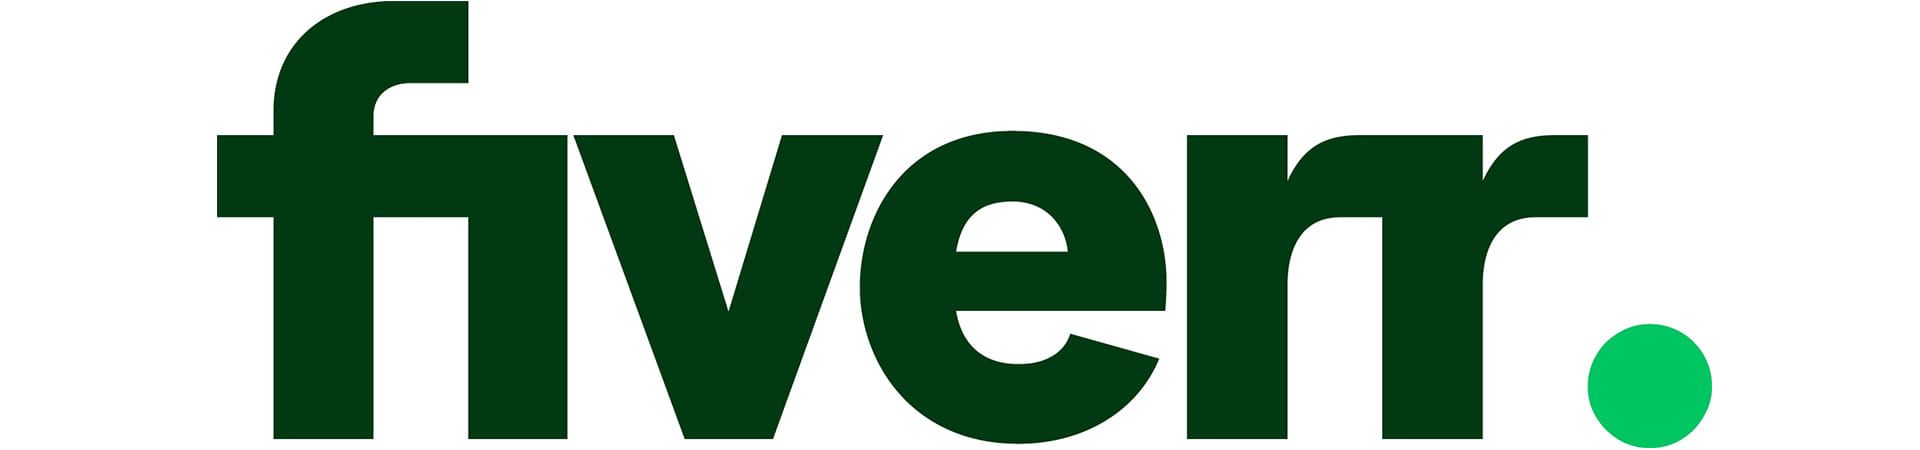 Fiverr Coupon Codes - Get Free Connetions